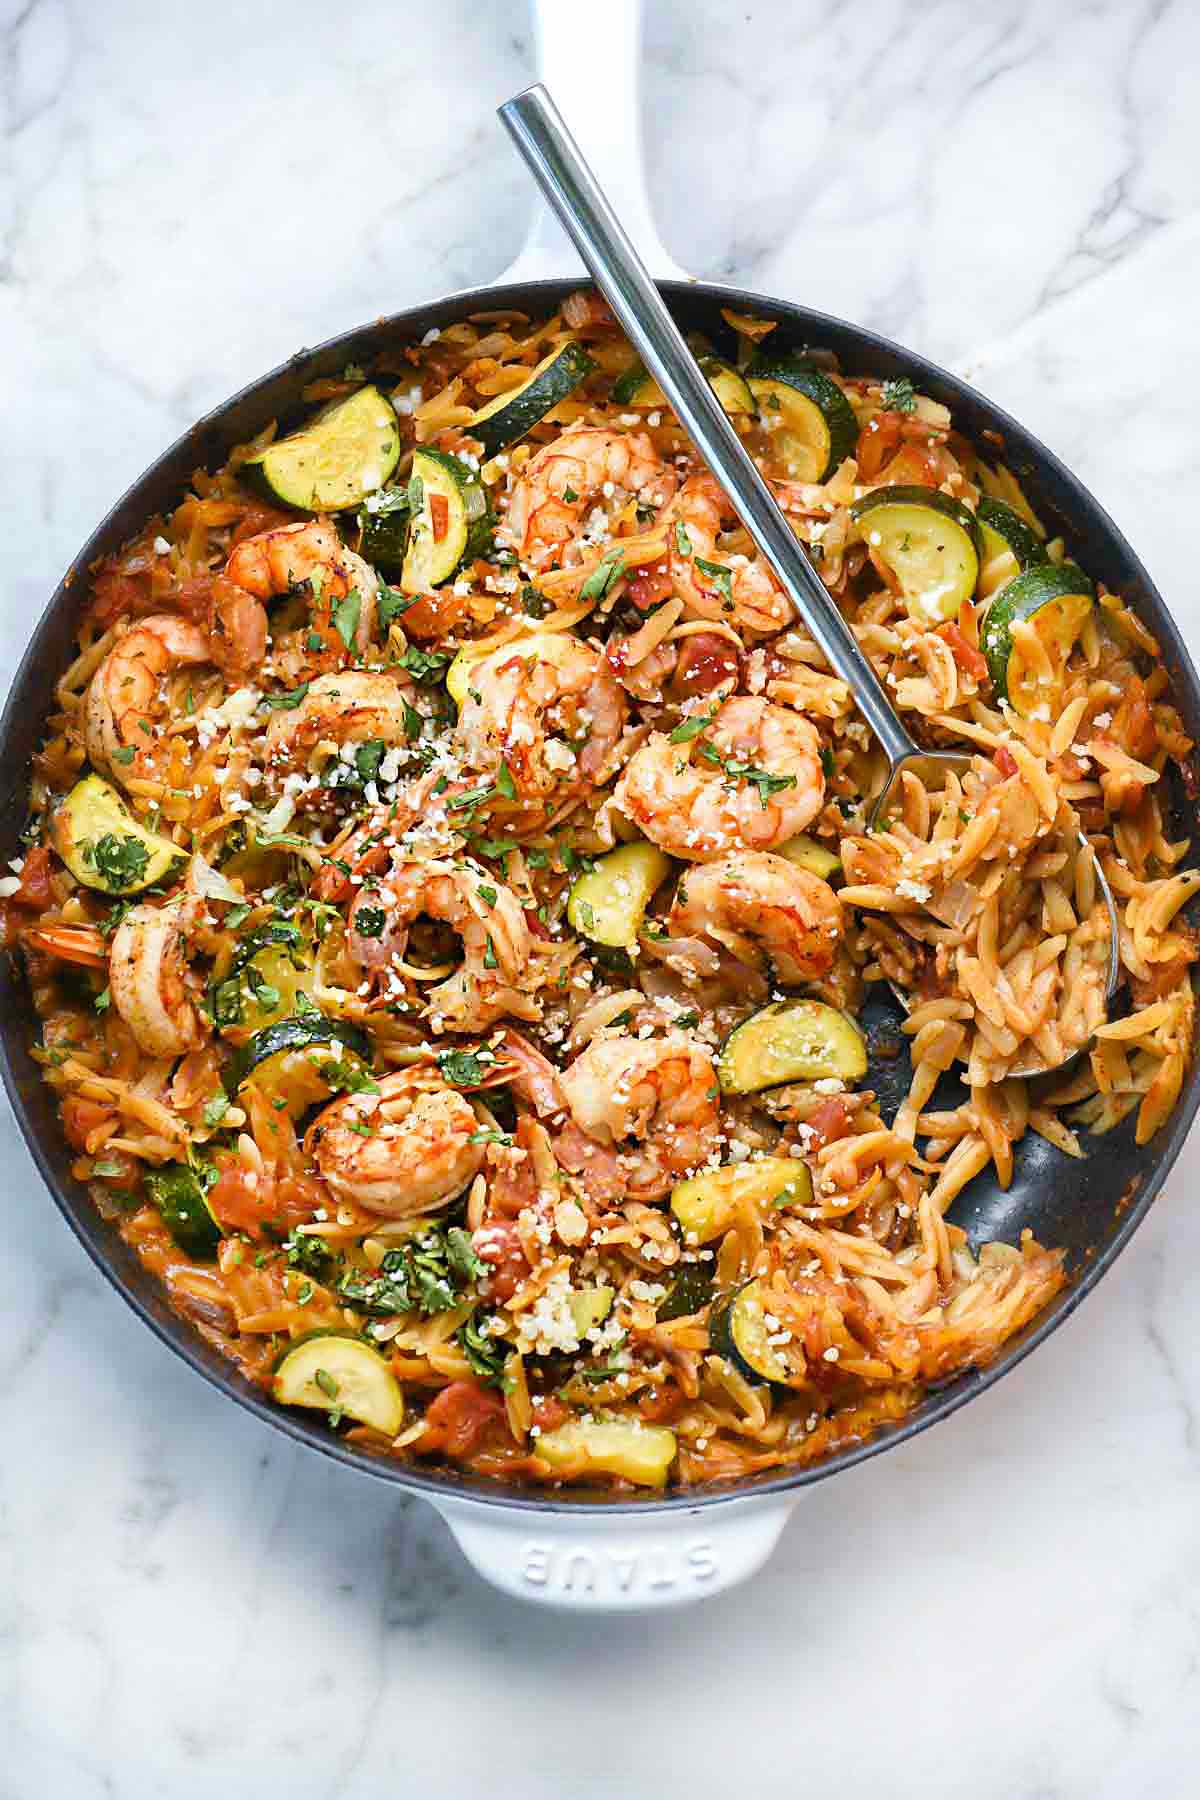 orzo with shrimp and zucchini from foodie crush